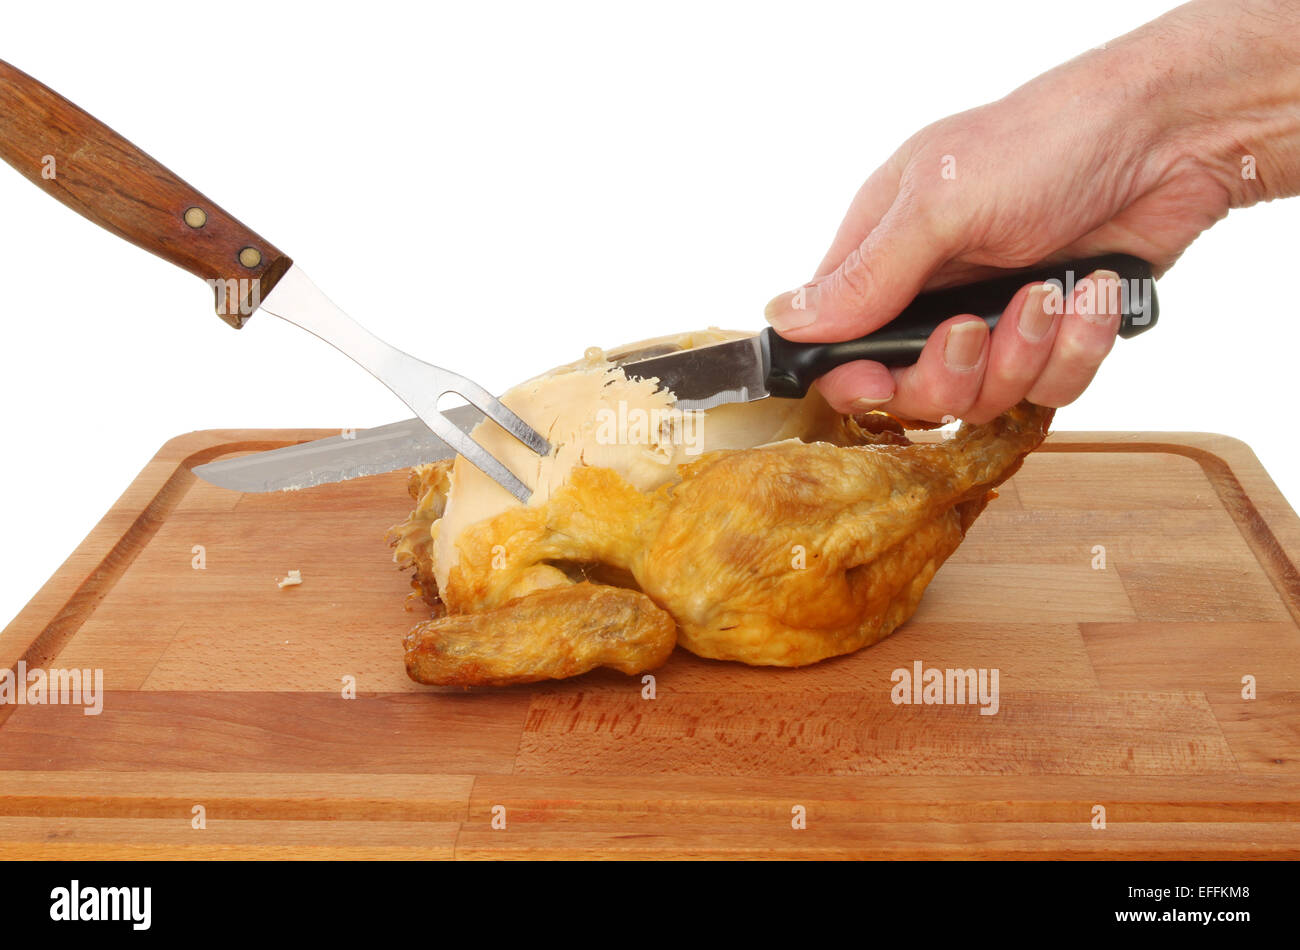 Hand with knife carving a roast chicken on a wooden board Stock Photo